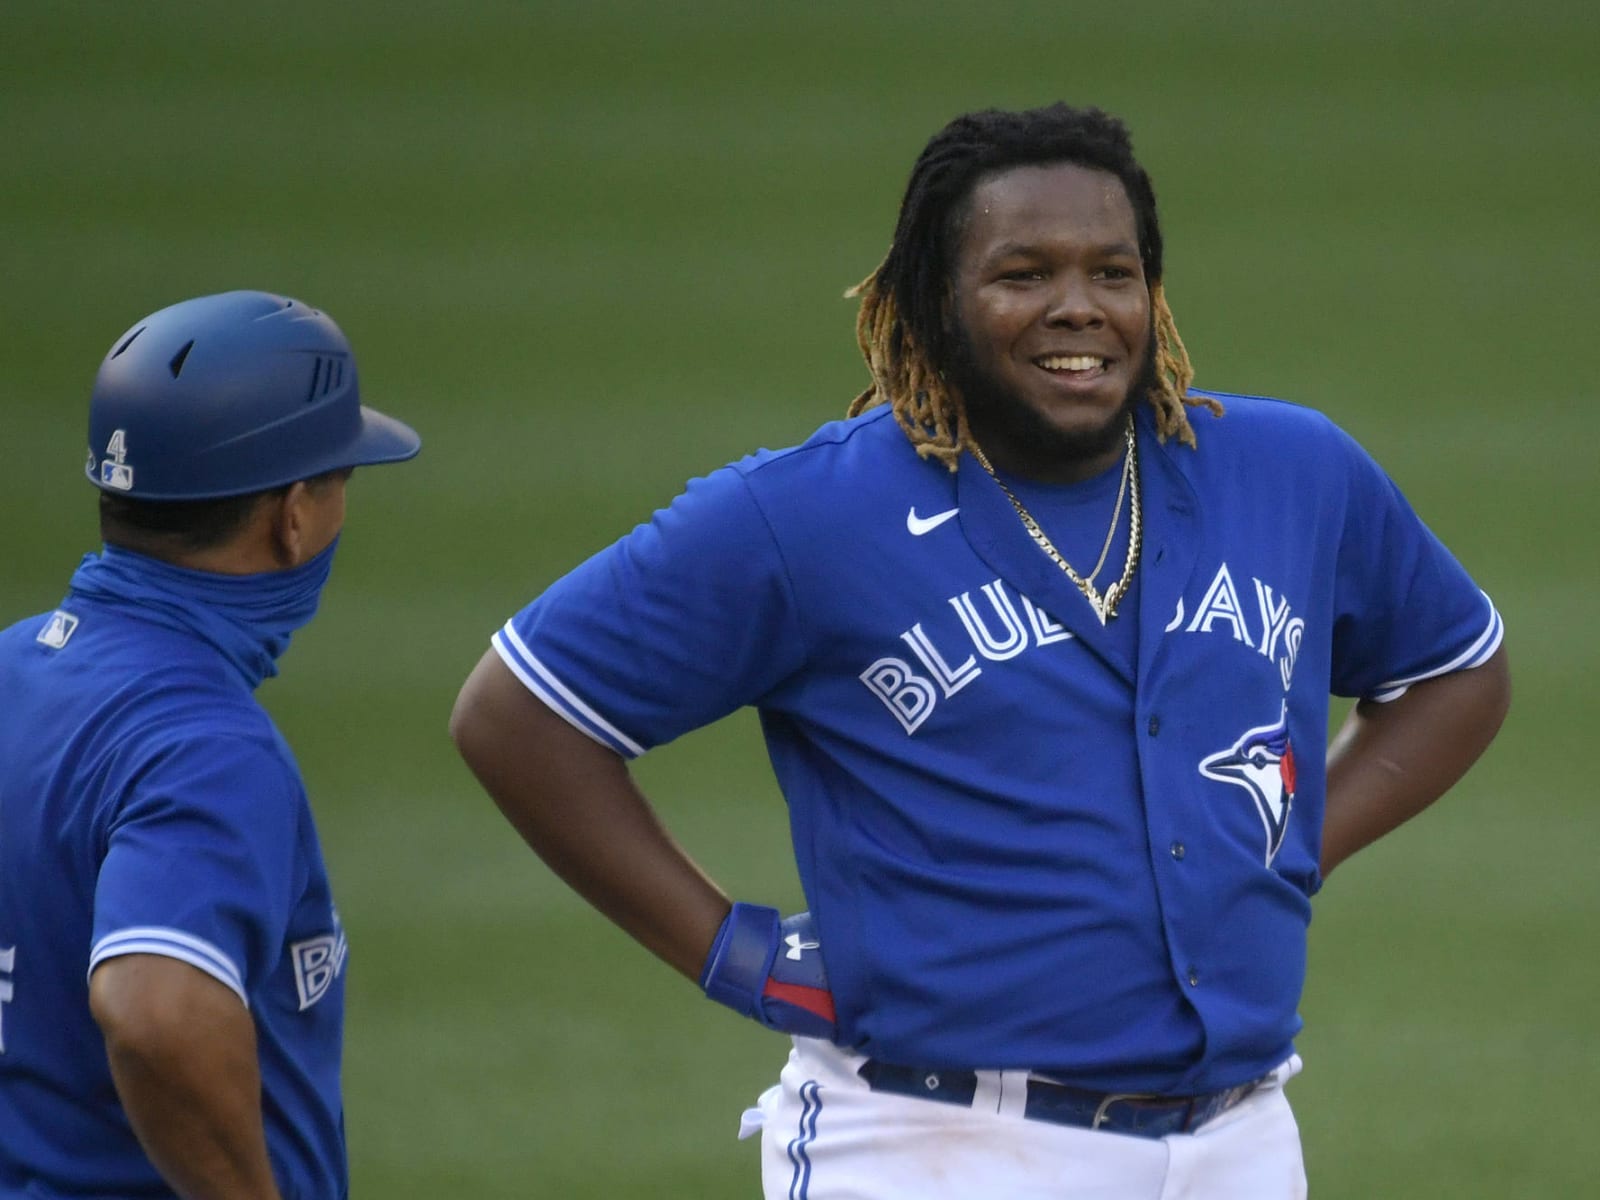 Vladimir Guerrero Jr. lost over 40 pounds in off-season, vows to be better  prepared. So far it's paid off – Winnipeg Free Press